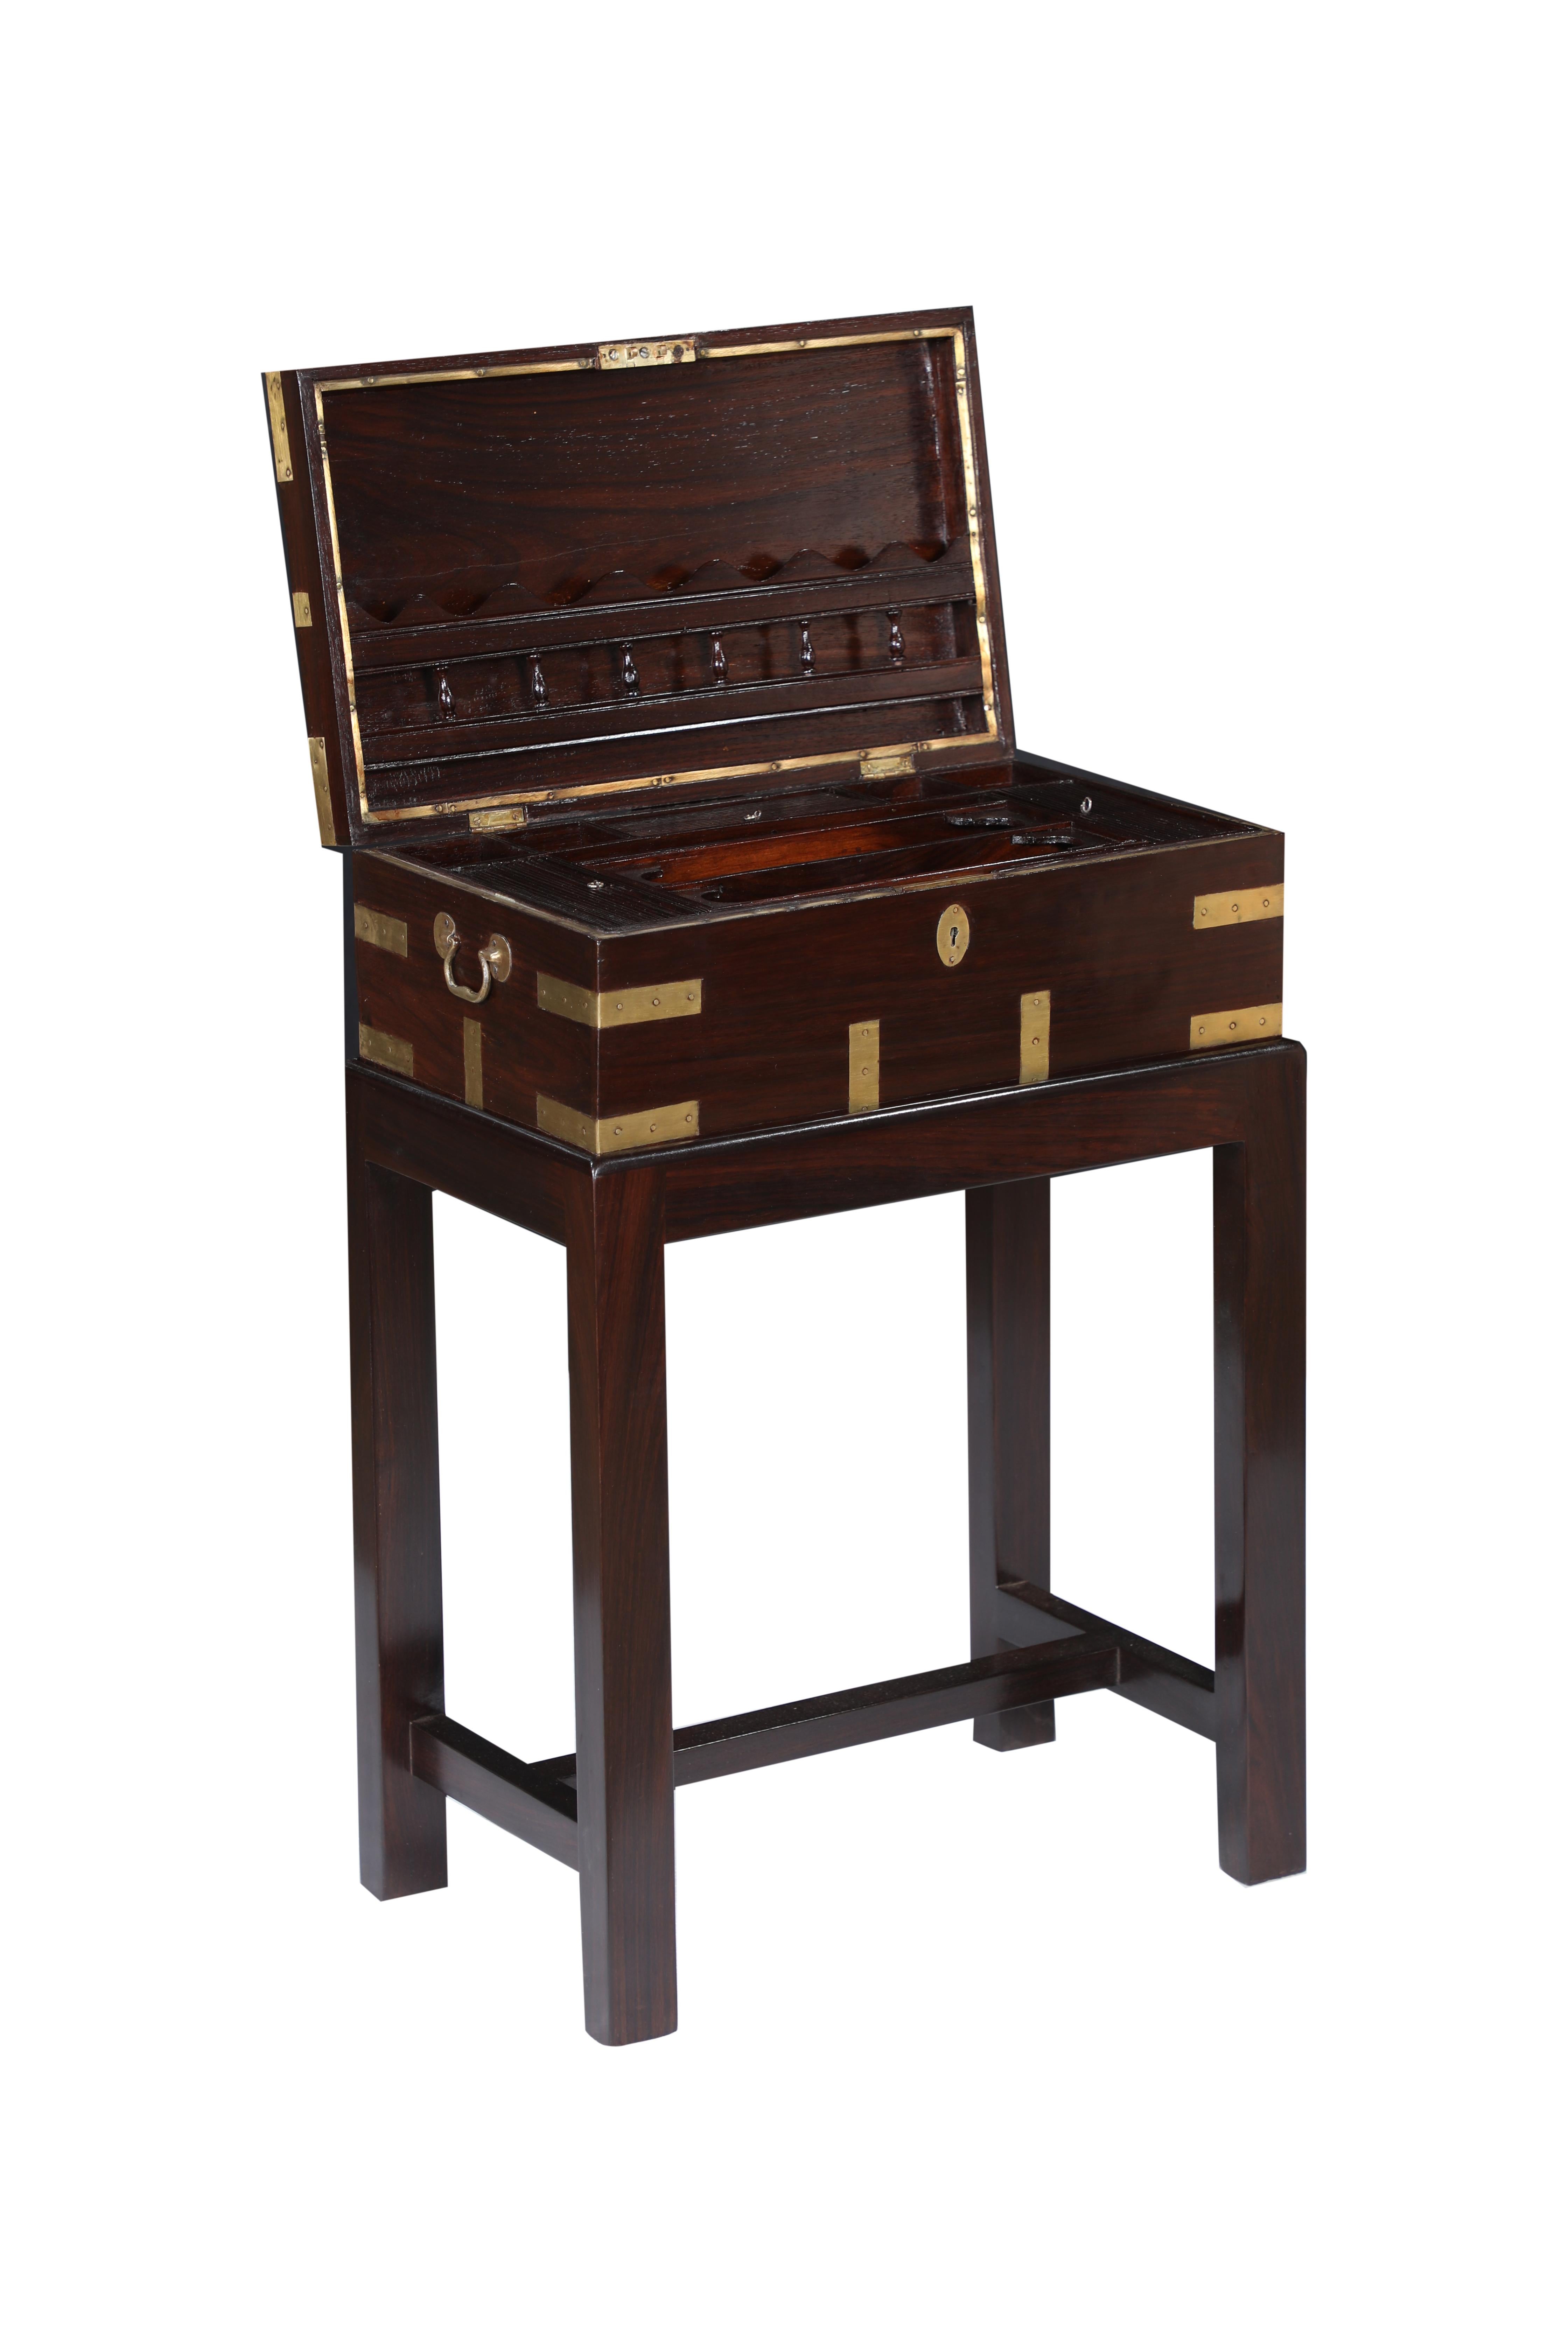 British Campaign Officer's Chest in Rosewood on Custom Stand, Early 1900's In Good Condition For Sale In Nantucket, MA